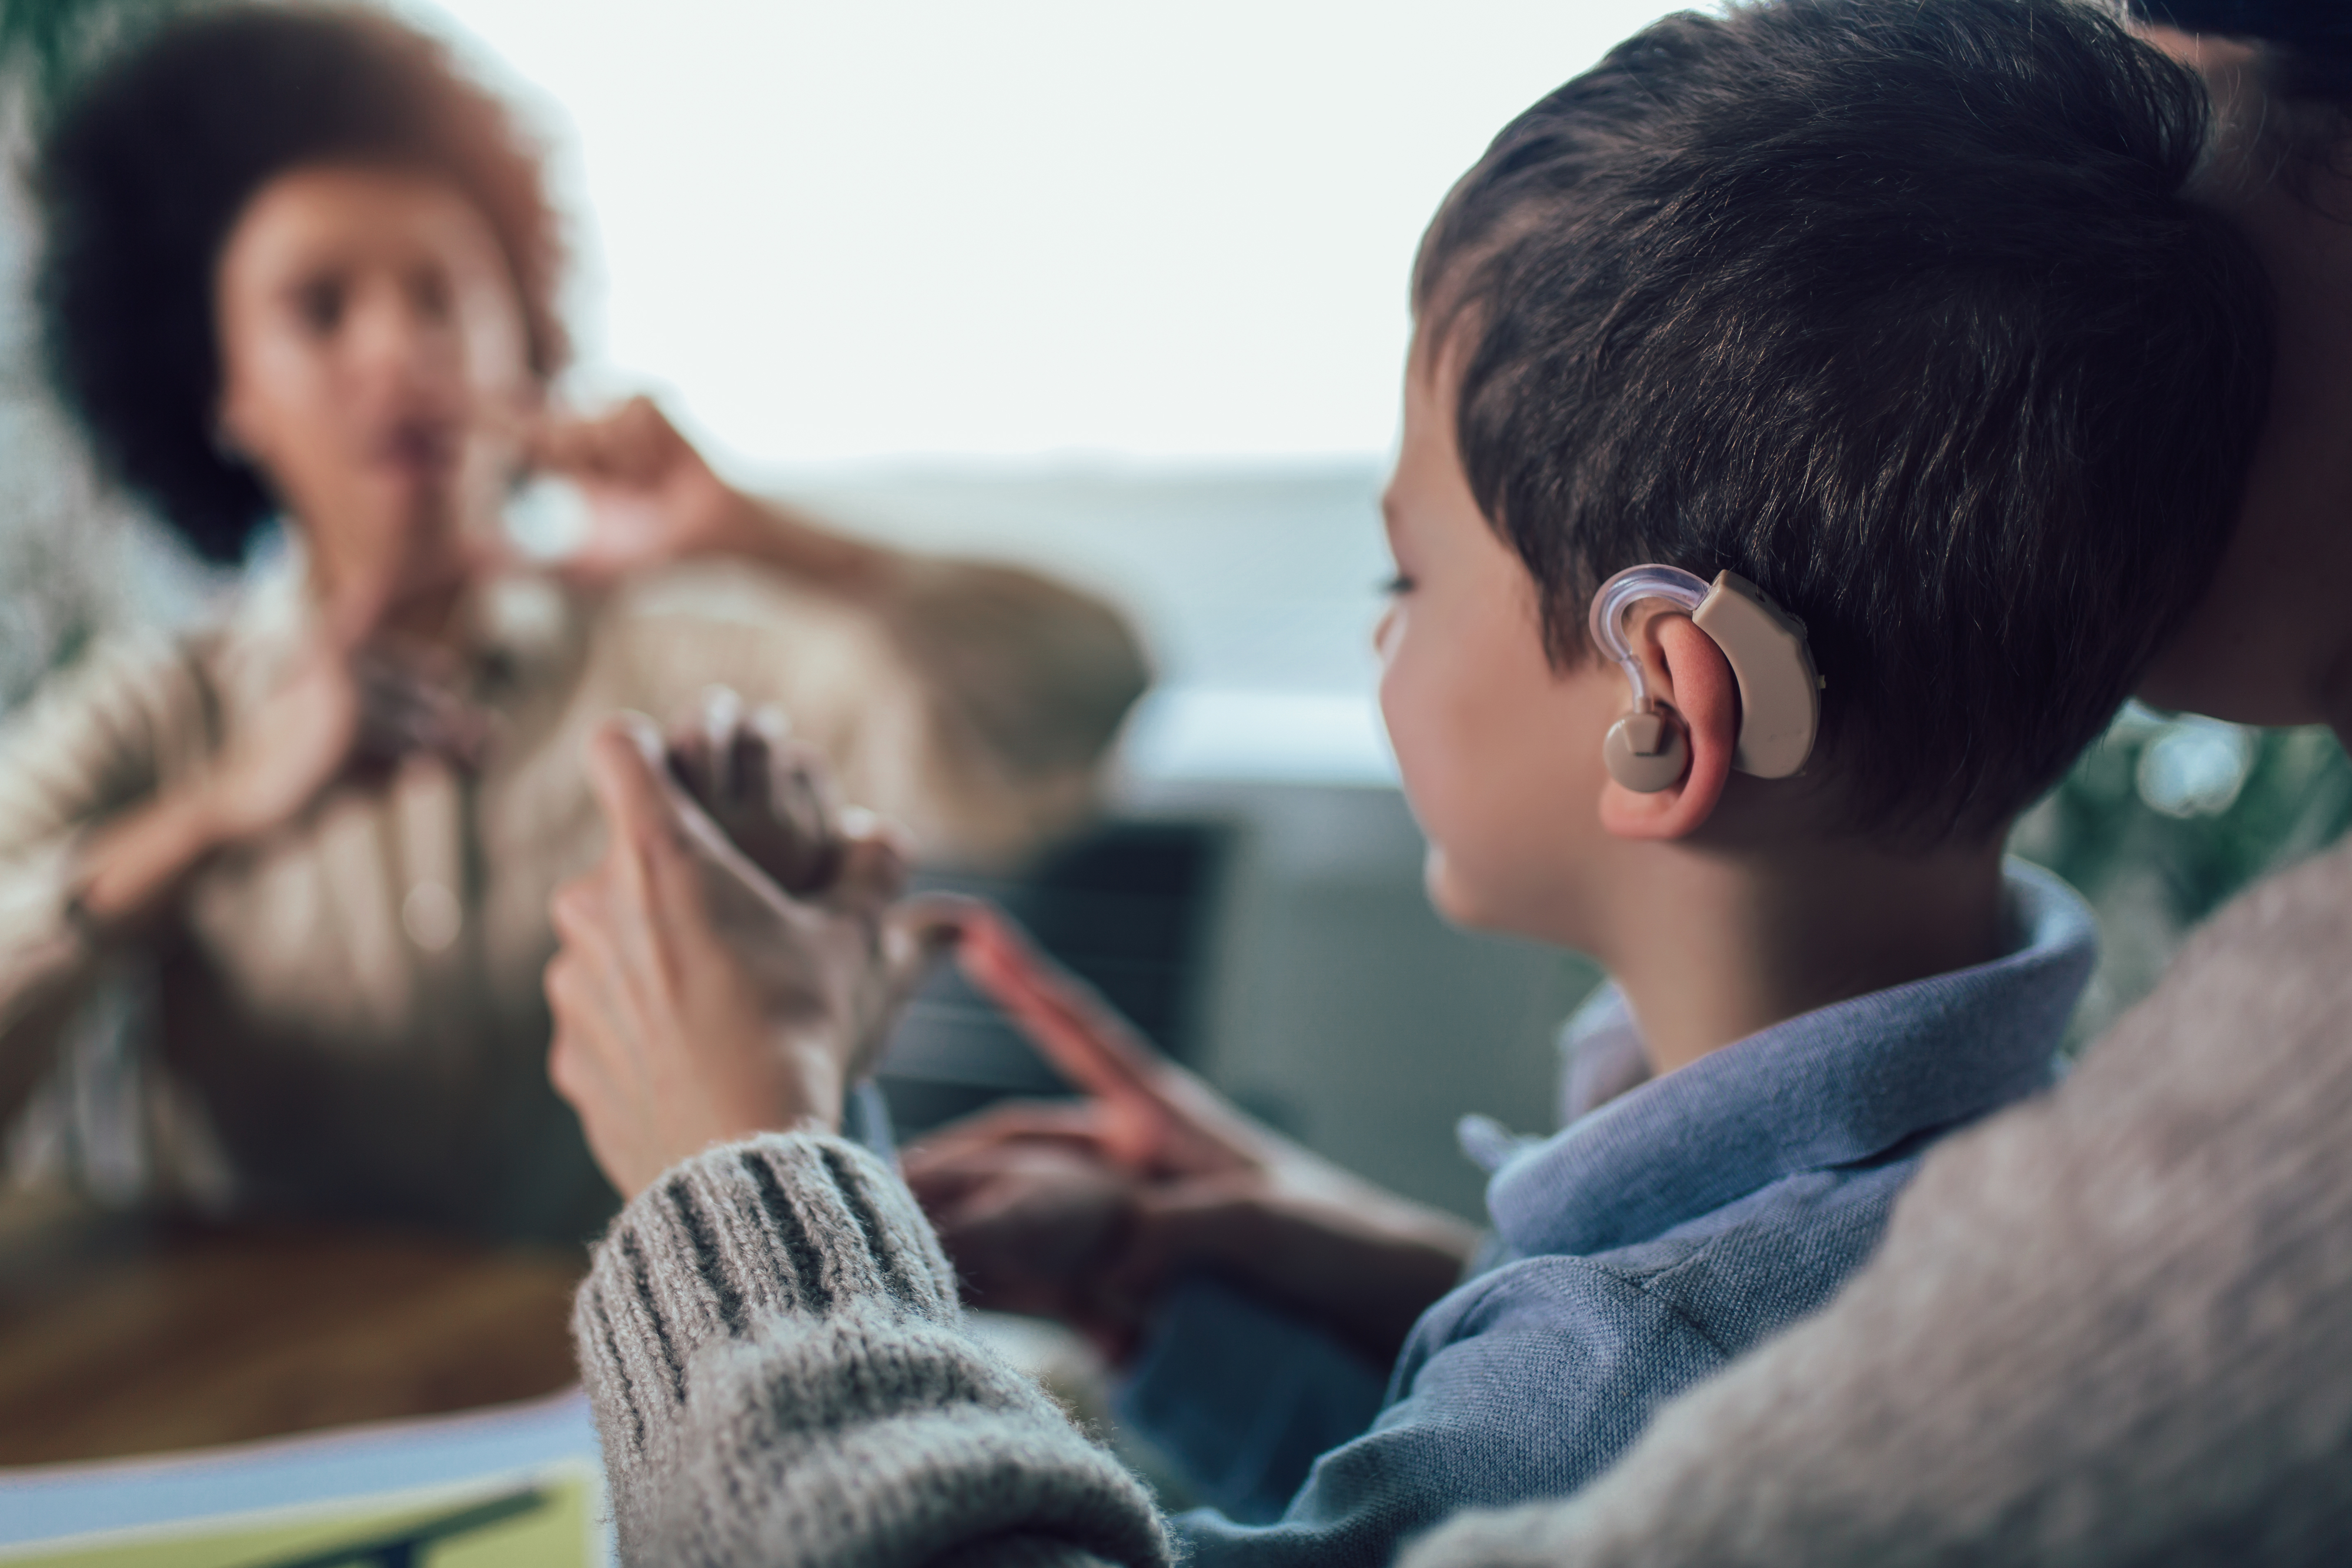 A young boy with a hearing aid communicates in sign language with a woman in the background, indicative of an inclusive and accessible learning environment